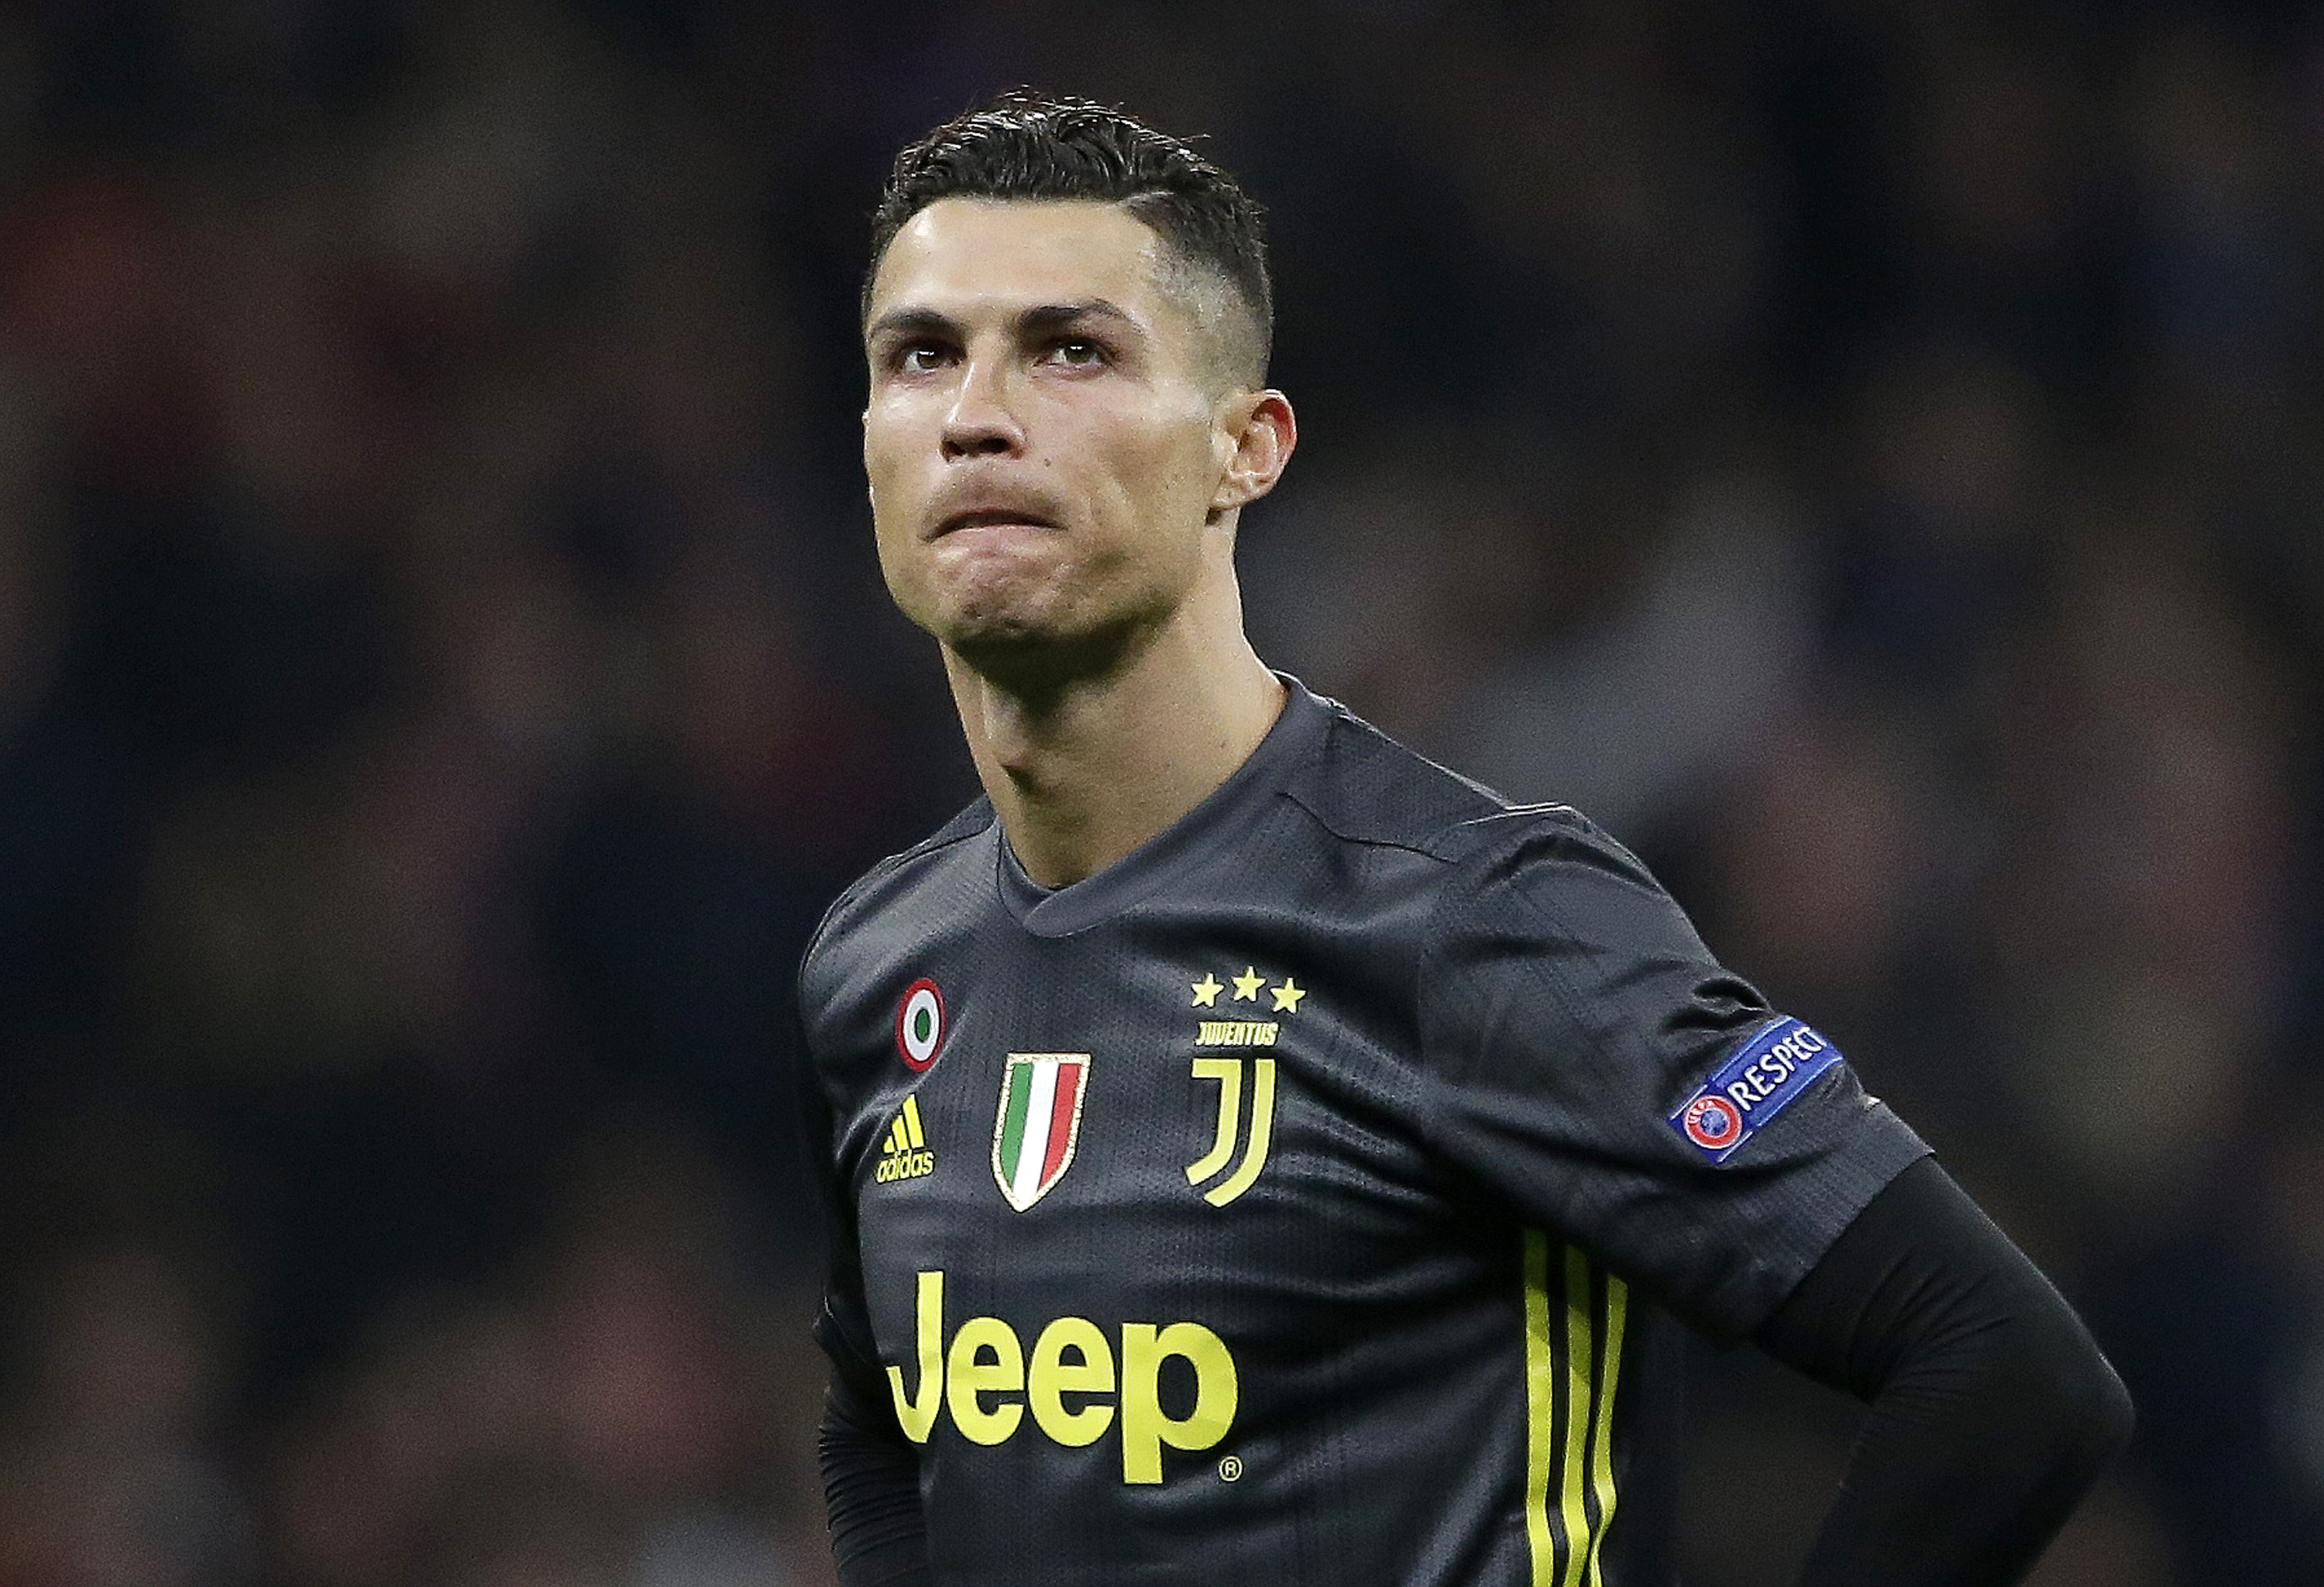 Football star Cristiano Ronaldo looking dejected during a match between Club Atletico de Madrid and Juventus at Estadio Wanda Metropolitano on February 20, 2019 in Madrid, Spain | Photo: Getty Images